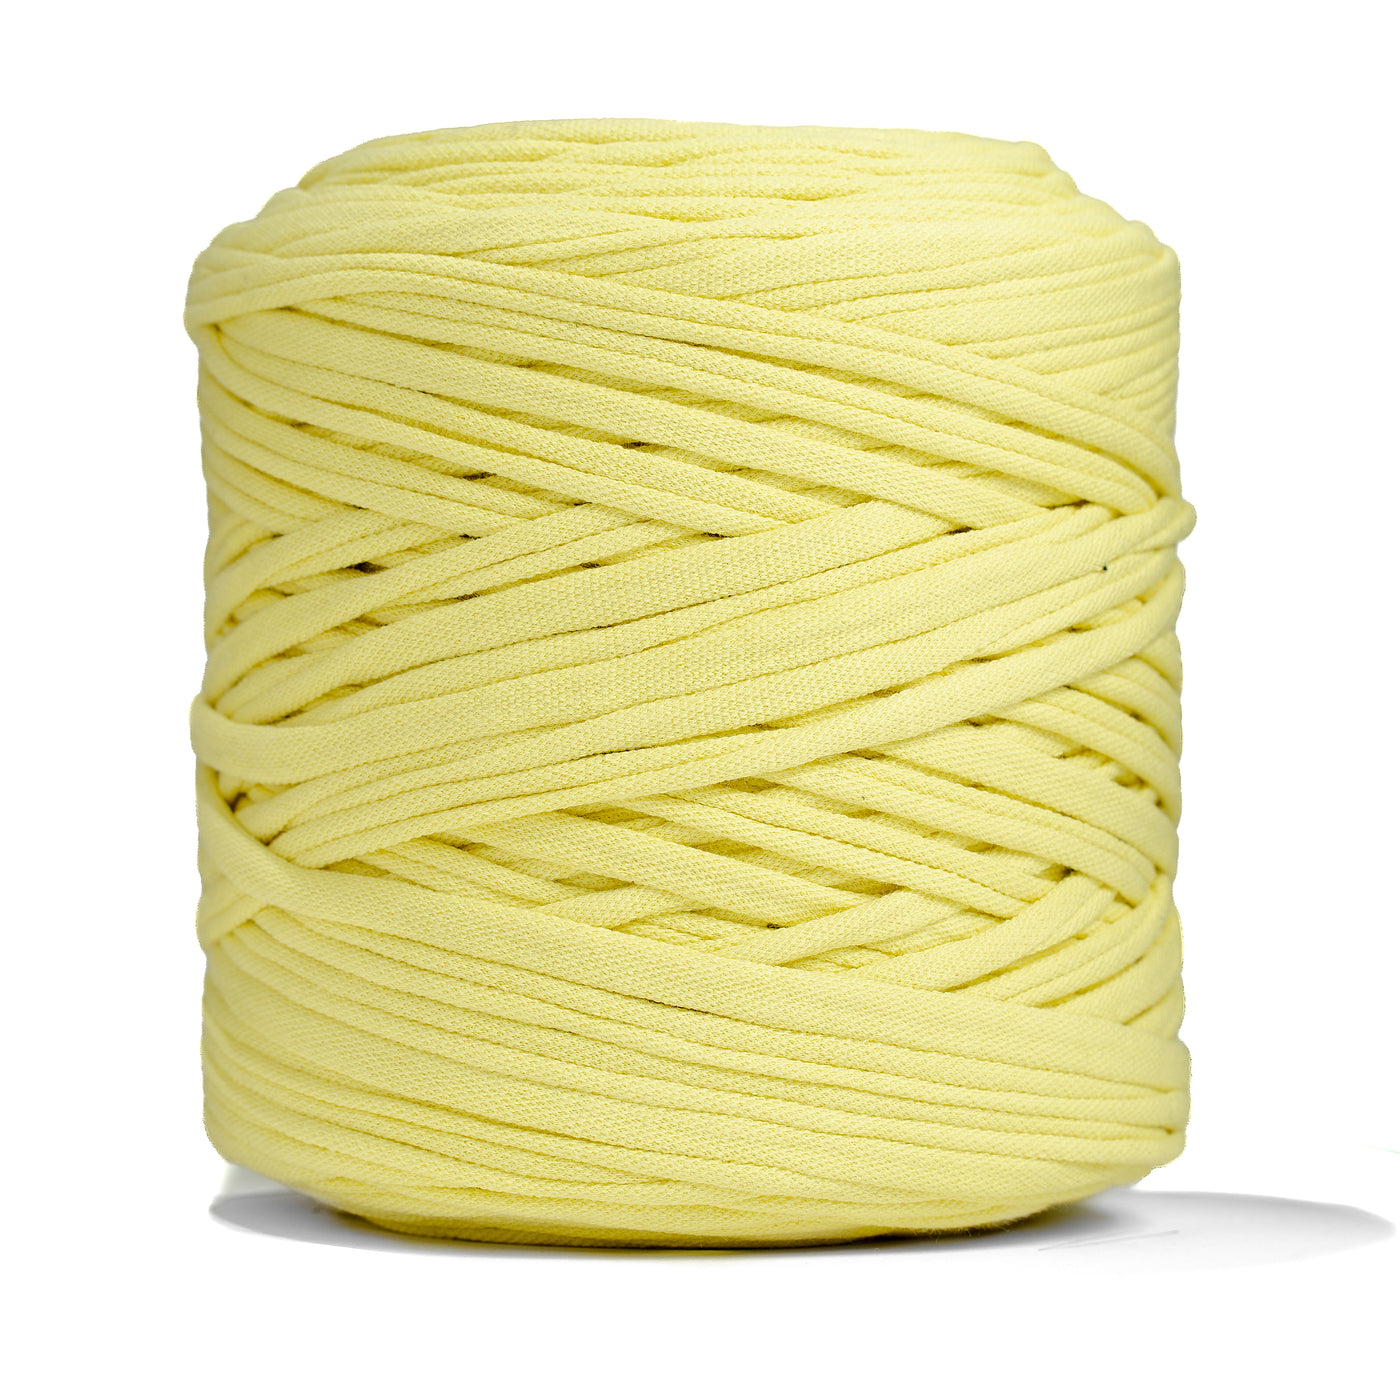 Recycled T-Shirt Fabric Yarn - Yellow Color